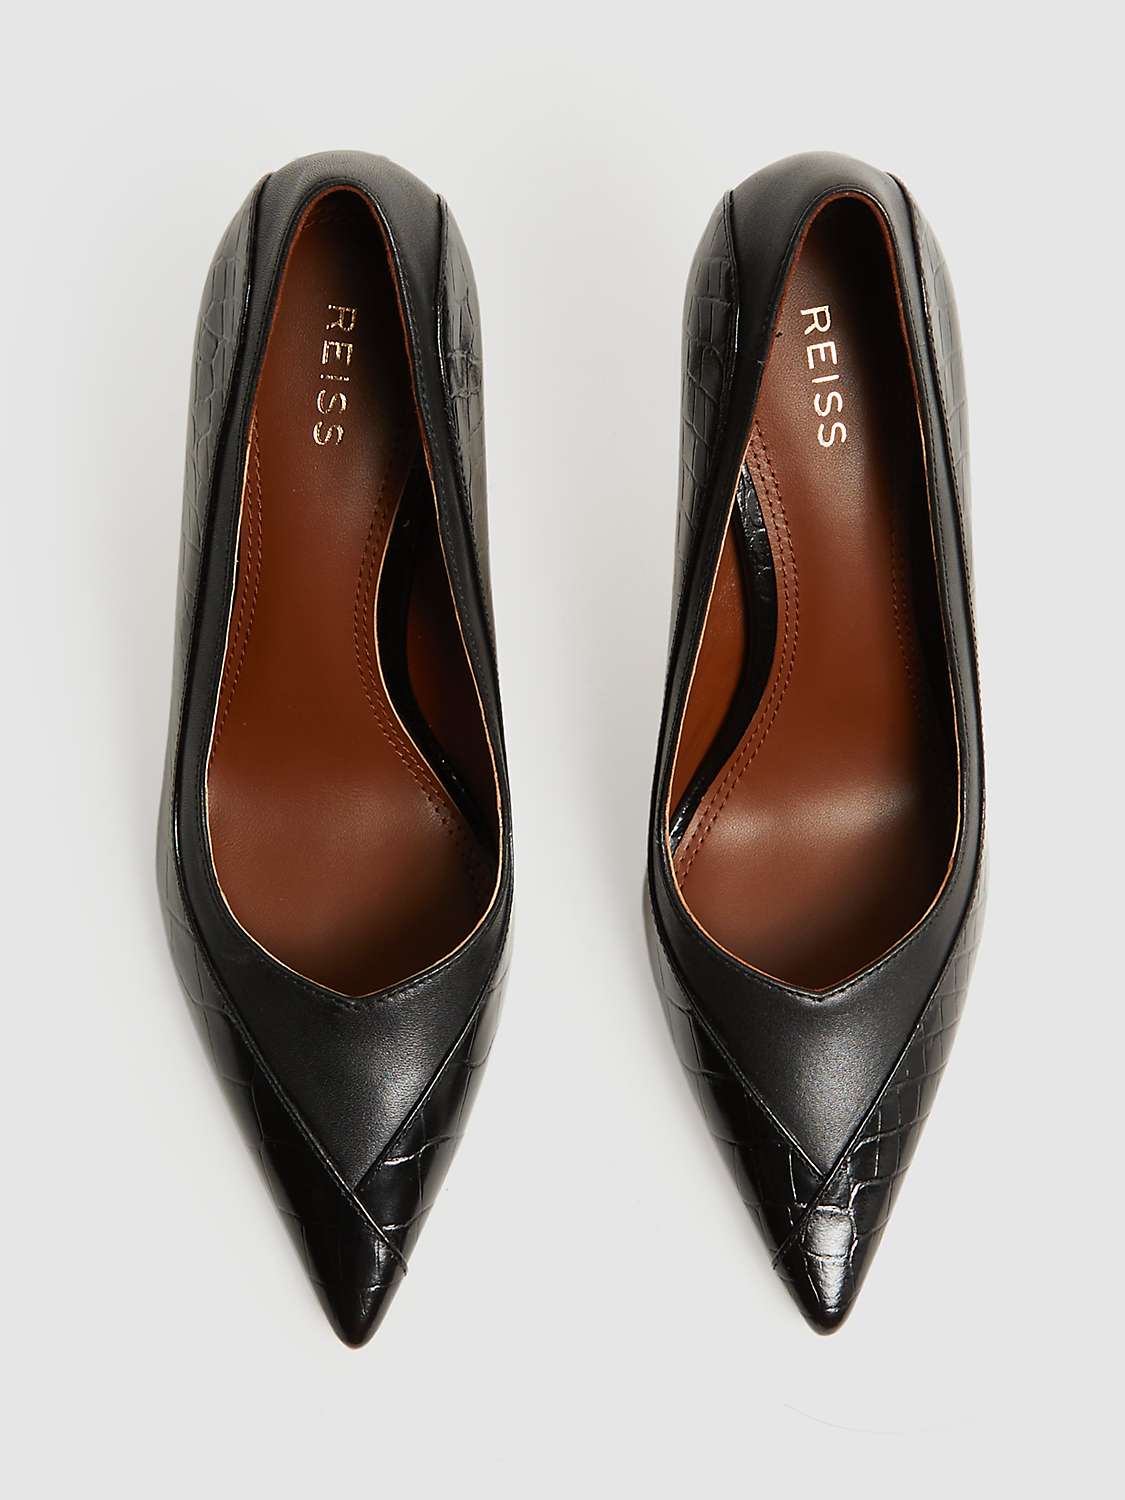 Buy Reiss Gwyneth High Heel Leather Court Shoes, Black Online at johnlewis.com